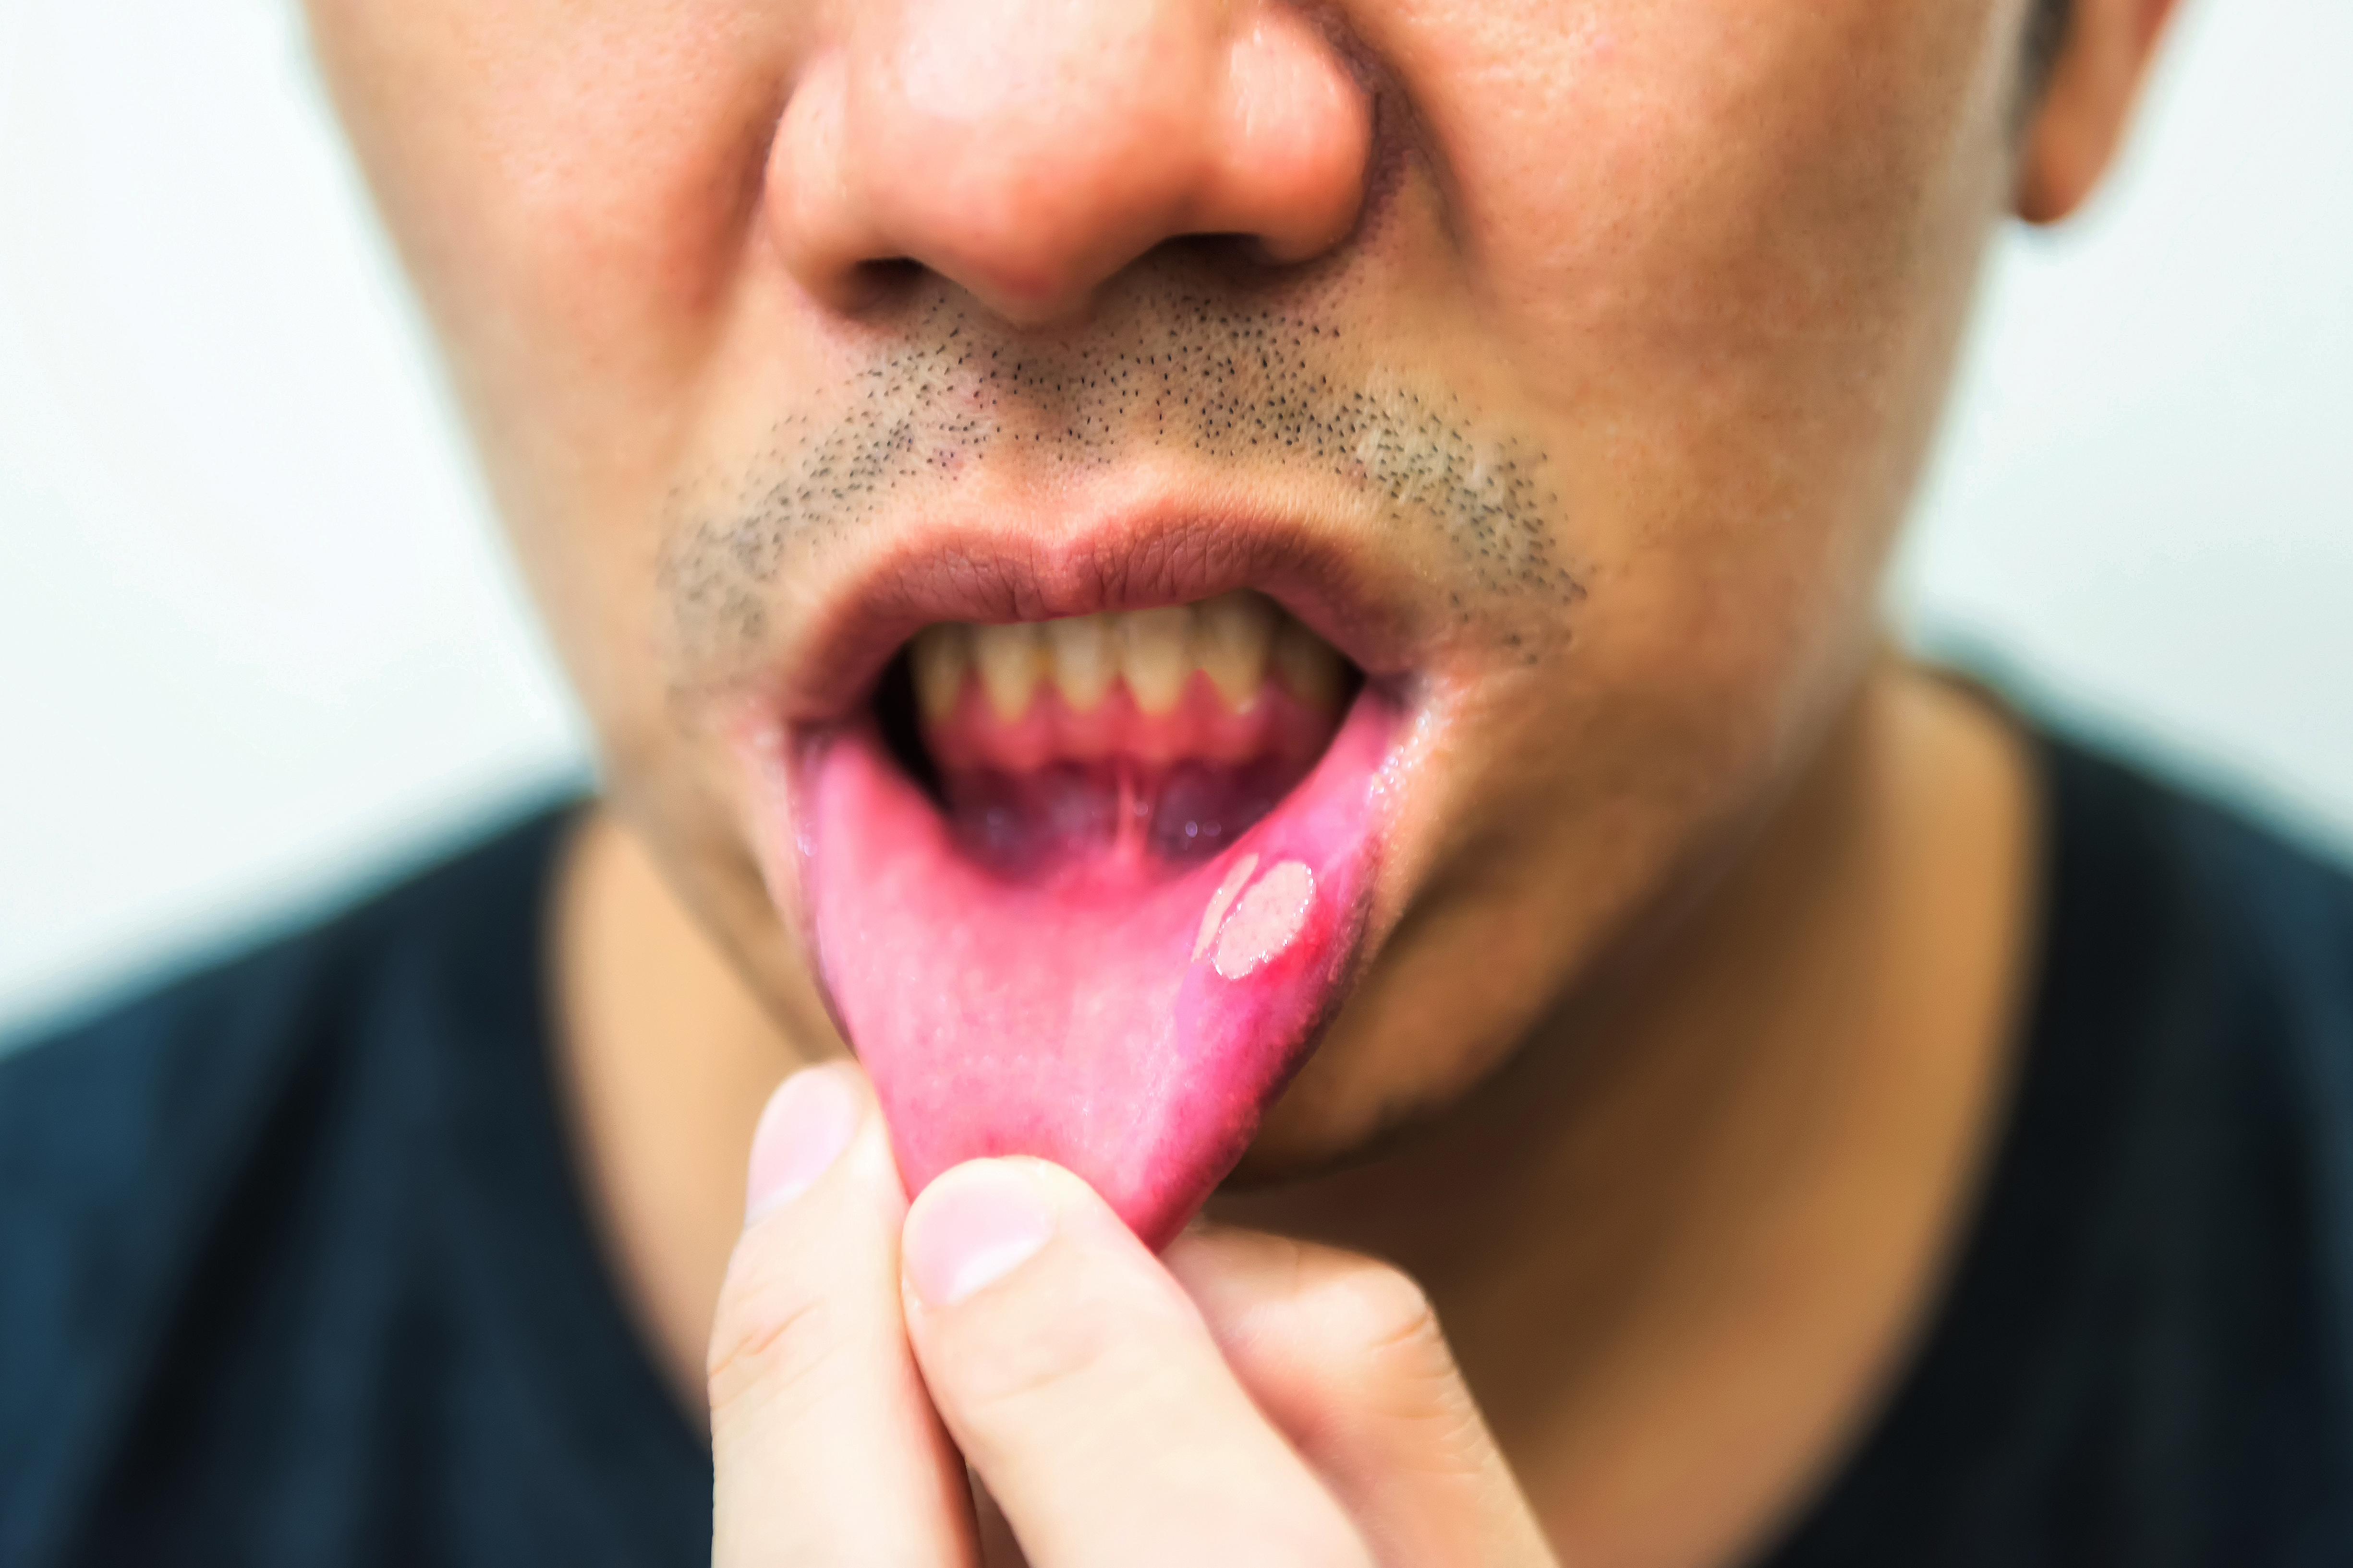 Man with a canker sore on the left side of his lower lip.